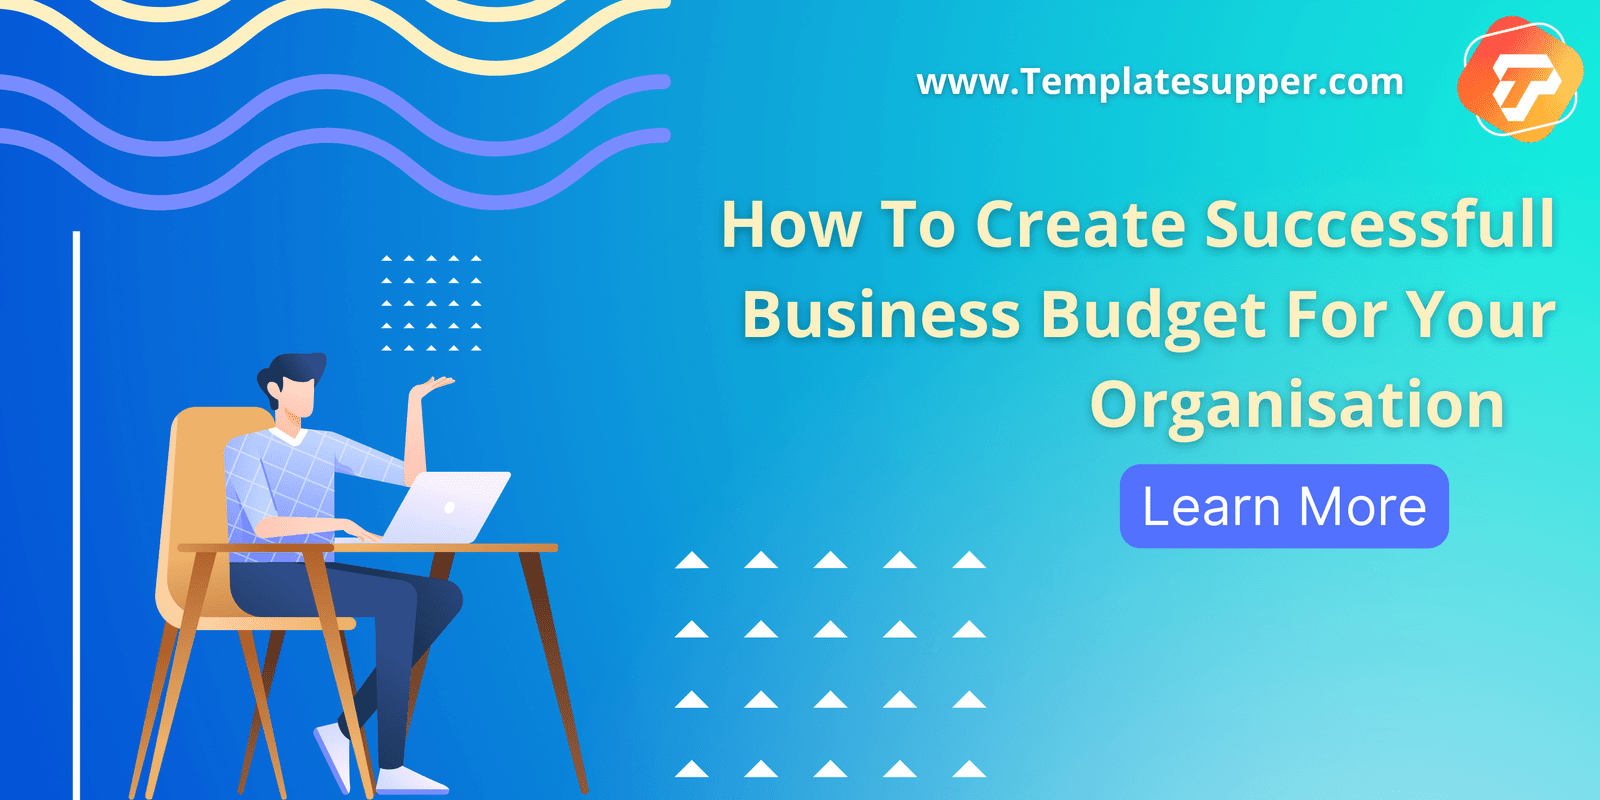 How To Create Successfull Business Budget For Your Organisation